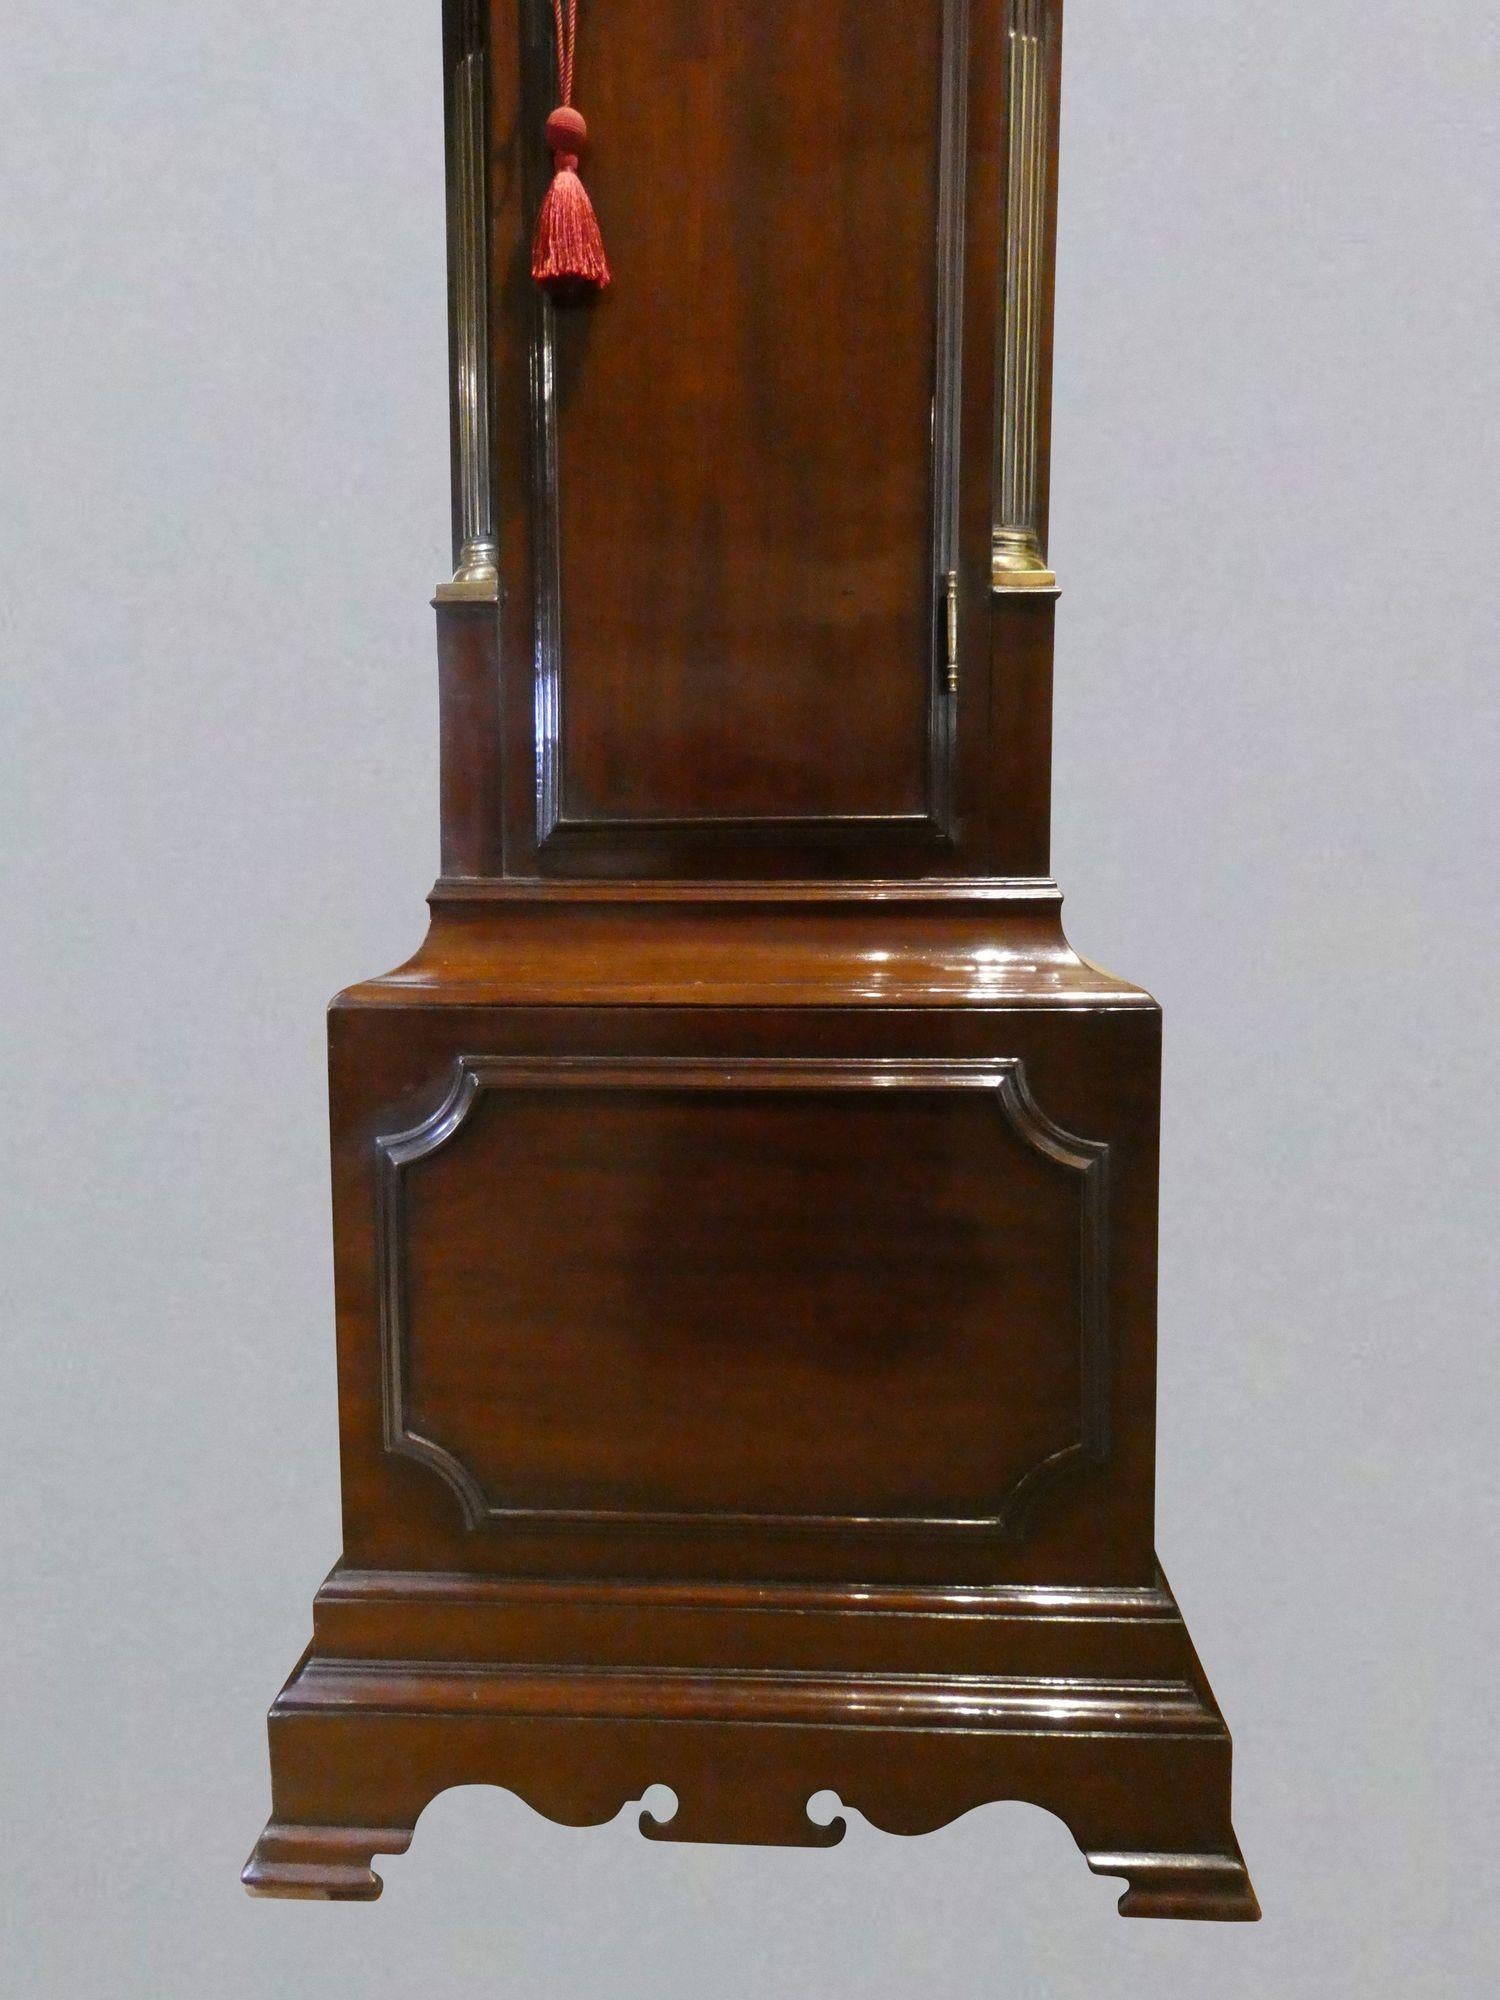 Georgian longcase clock by John Ross, London
 
Finely figured flame mahogany case with stepped base, raised moulding to the plinth, long break arch top trunk door with brass escutcheon, canted corners inset with brass. Break arch hood with brass